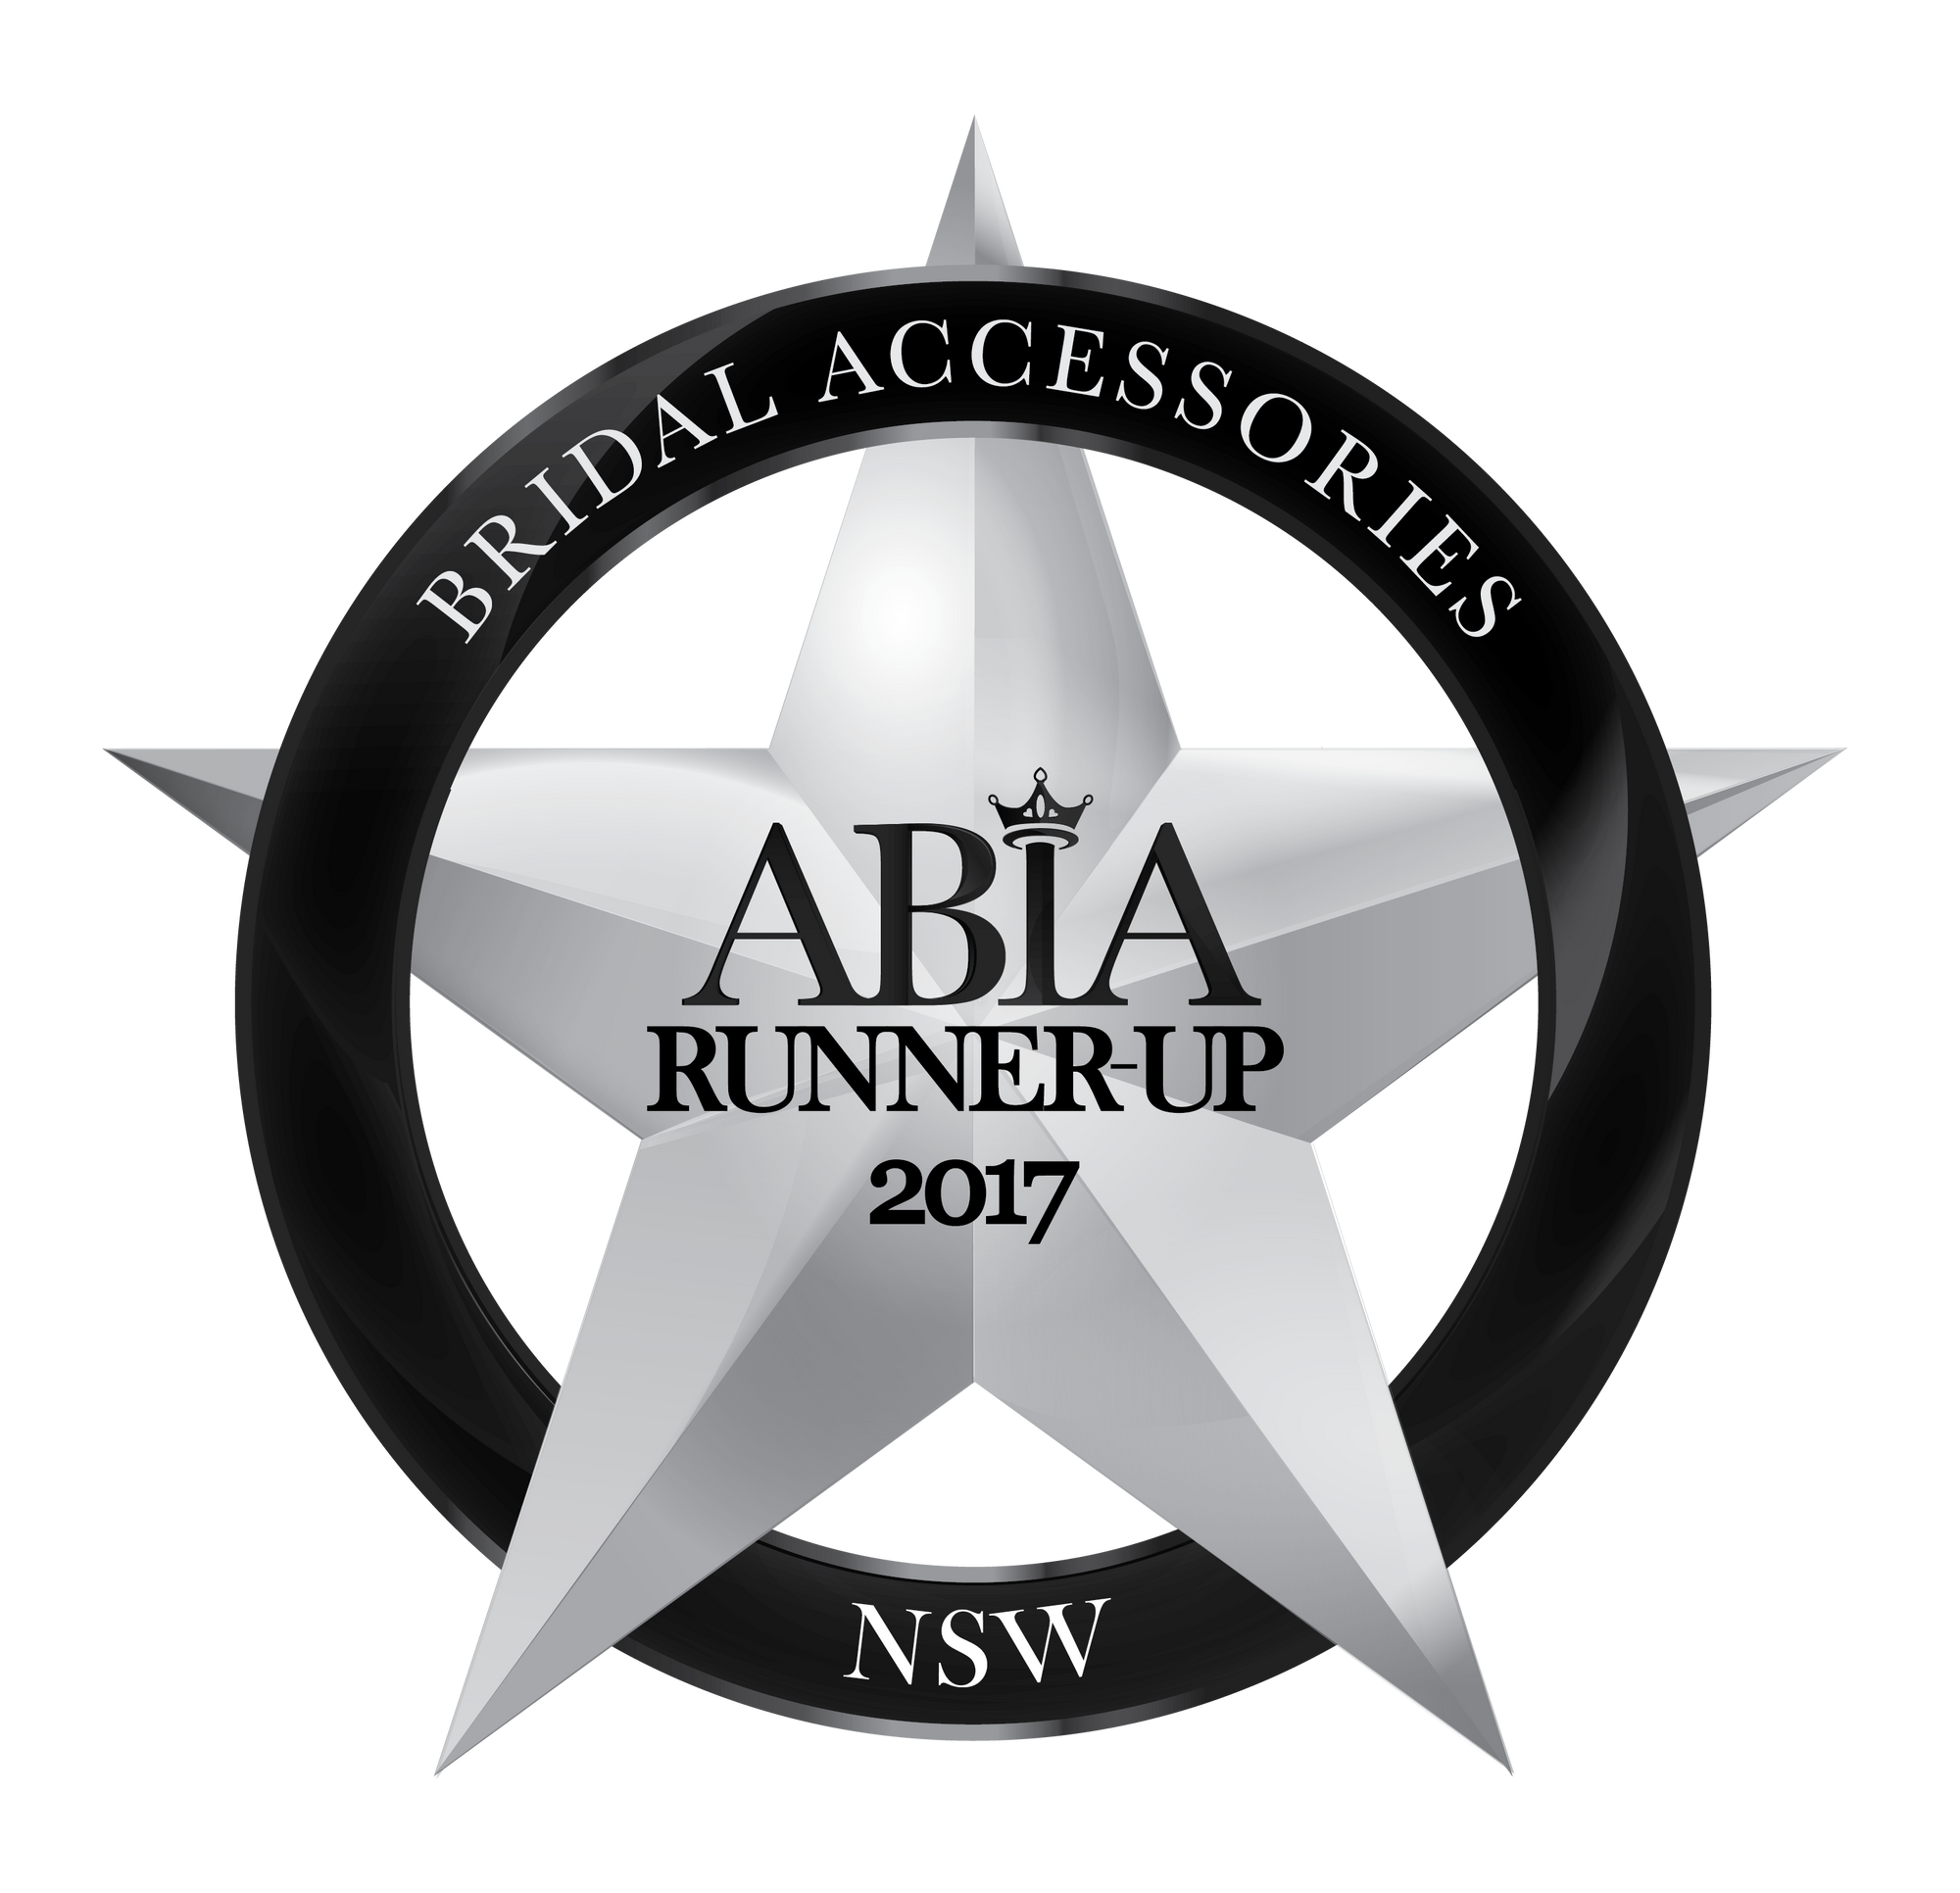 ABIA Runner up 2017 Bridal Accessories